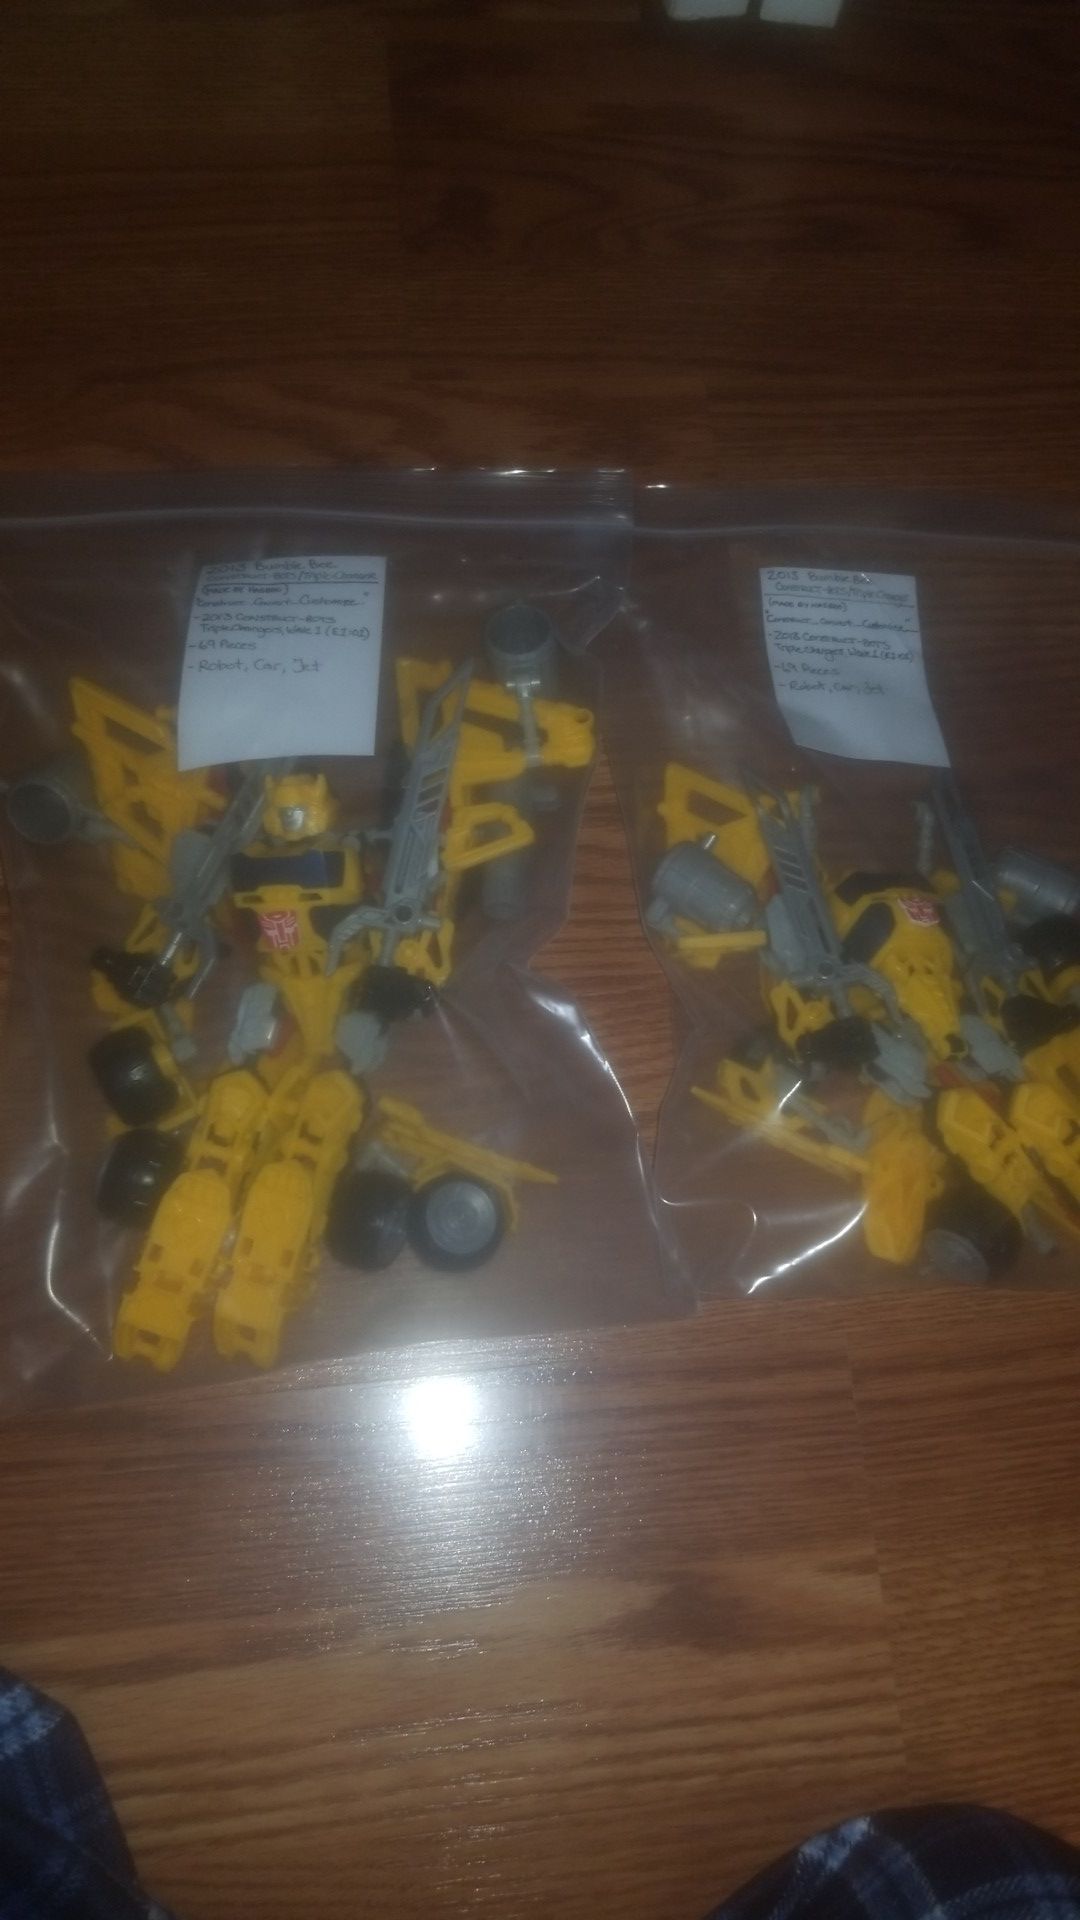 2013 bumble bee construct bots (triple changer)